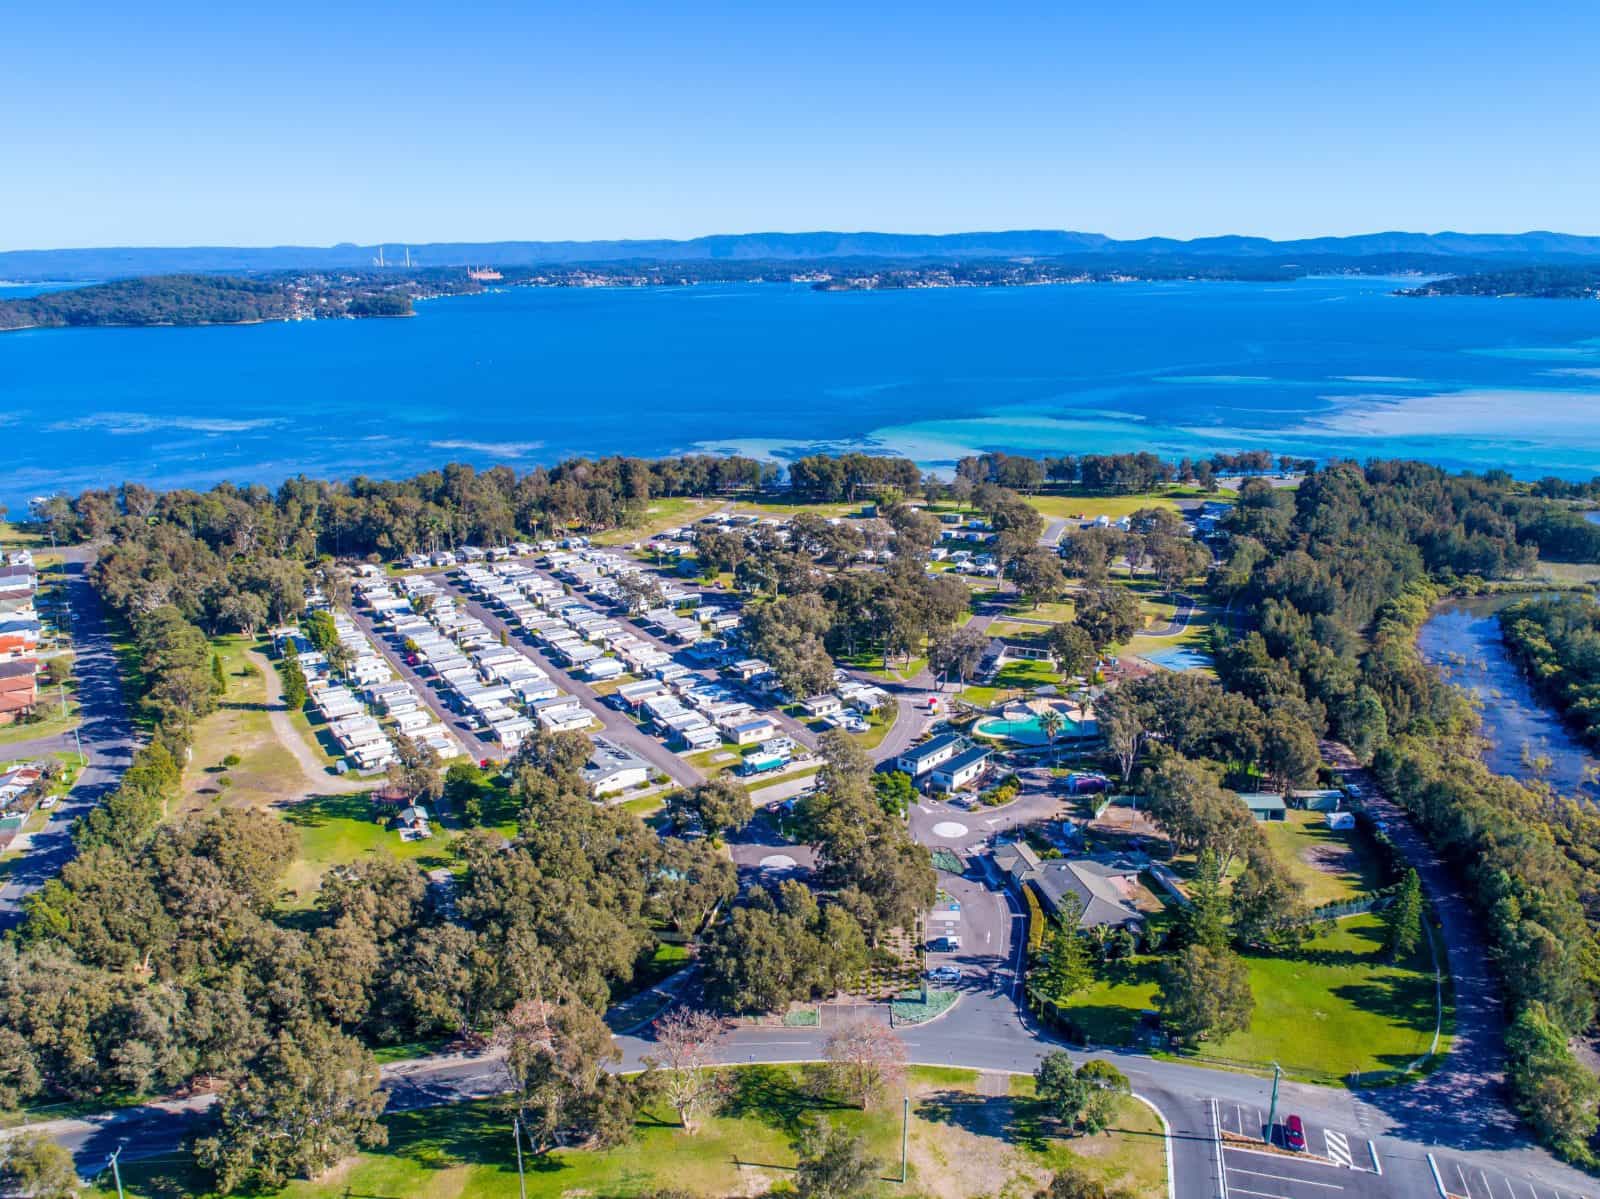 Aerial view - Swansea Gardens Lakeside Holiday Park